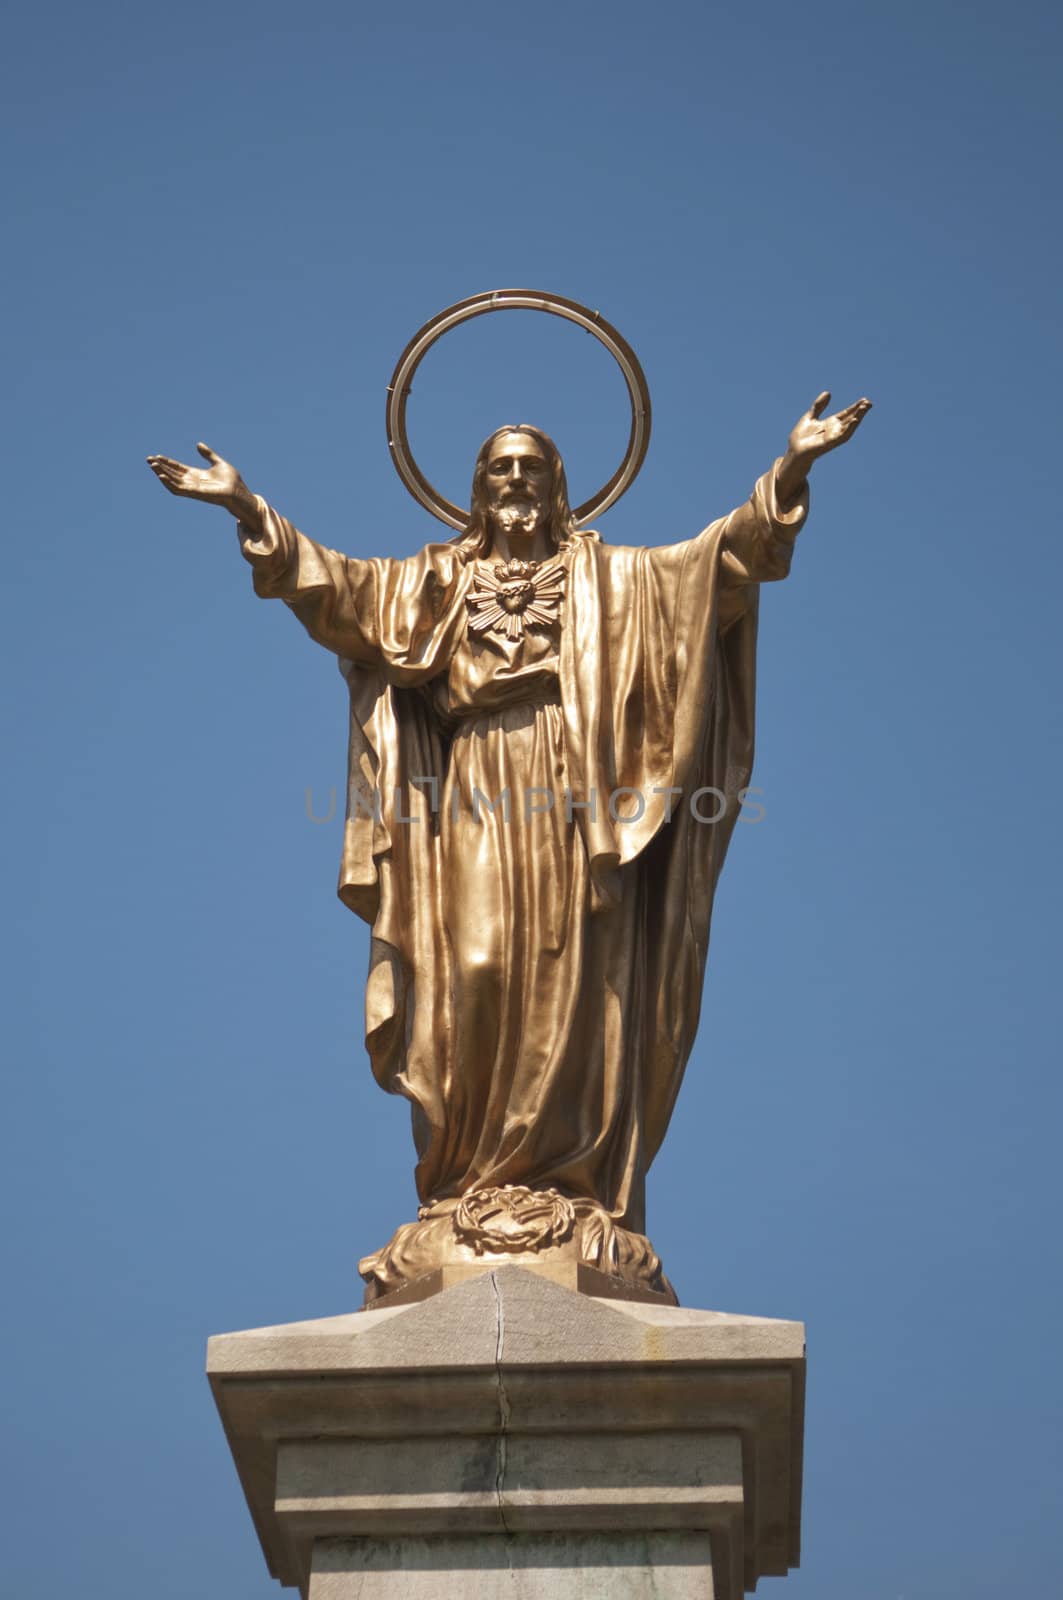 Statue of Jesus Christ on the deep blue sky background with copy space